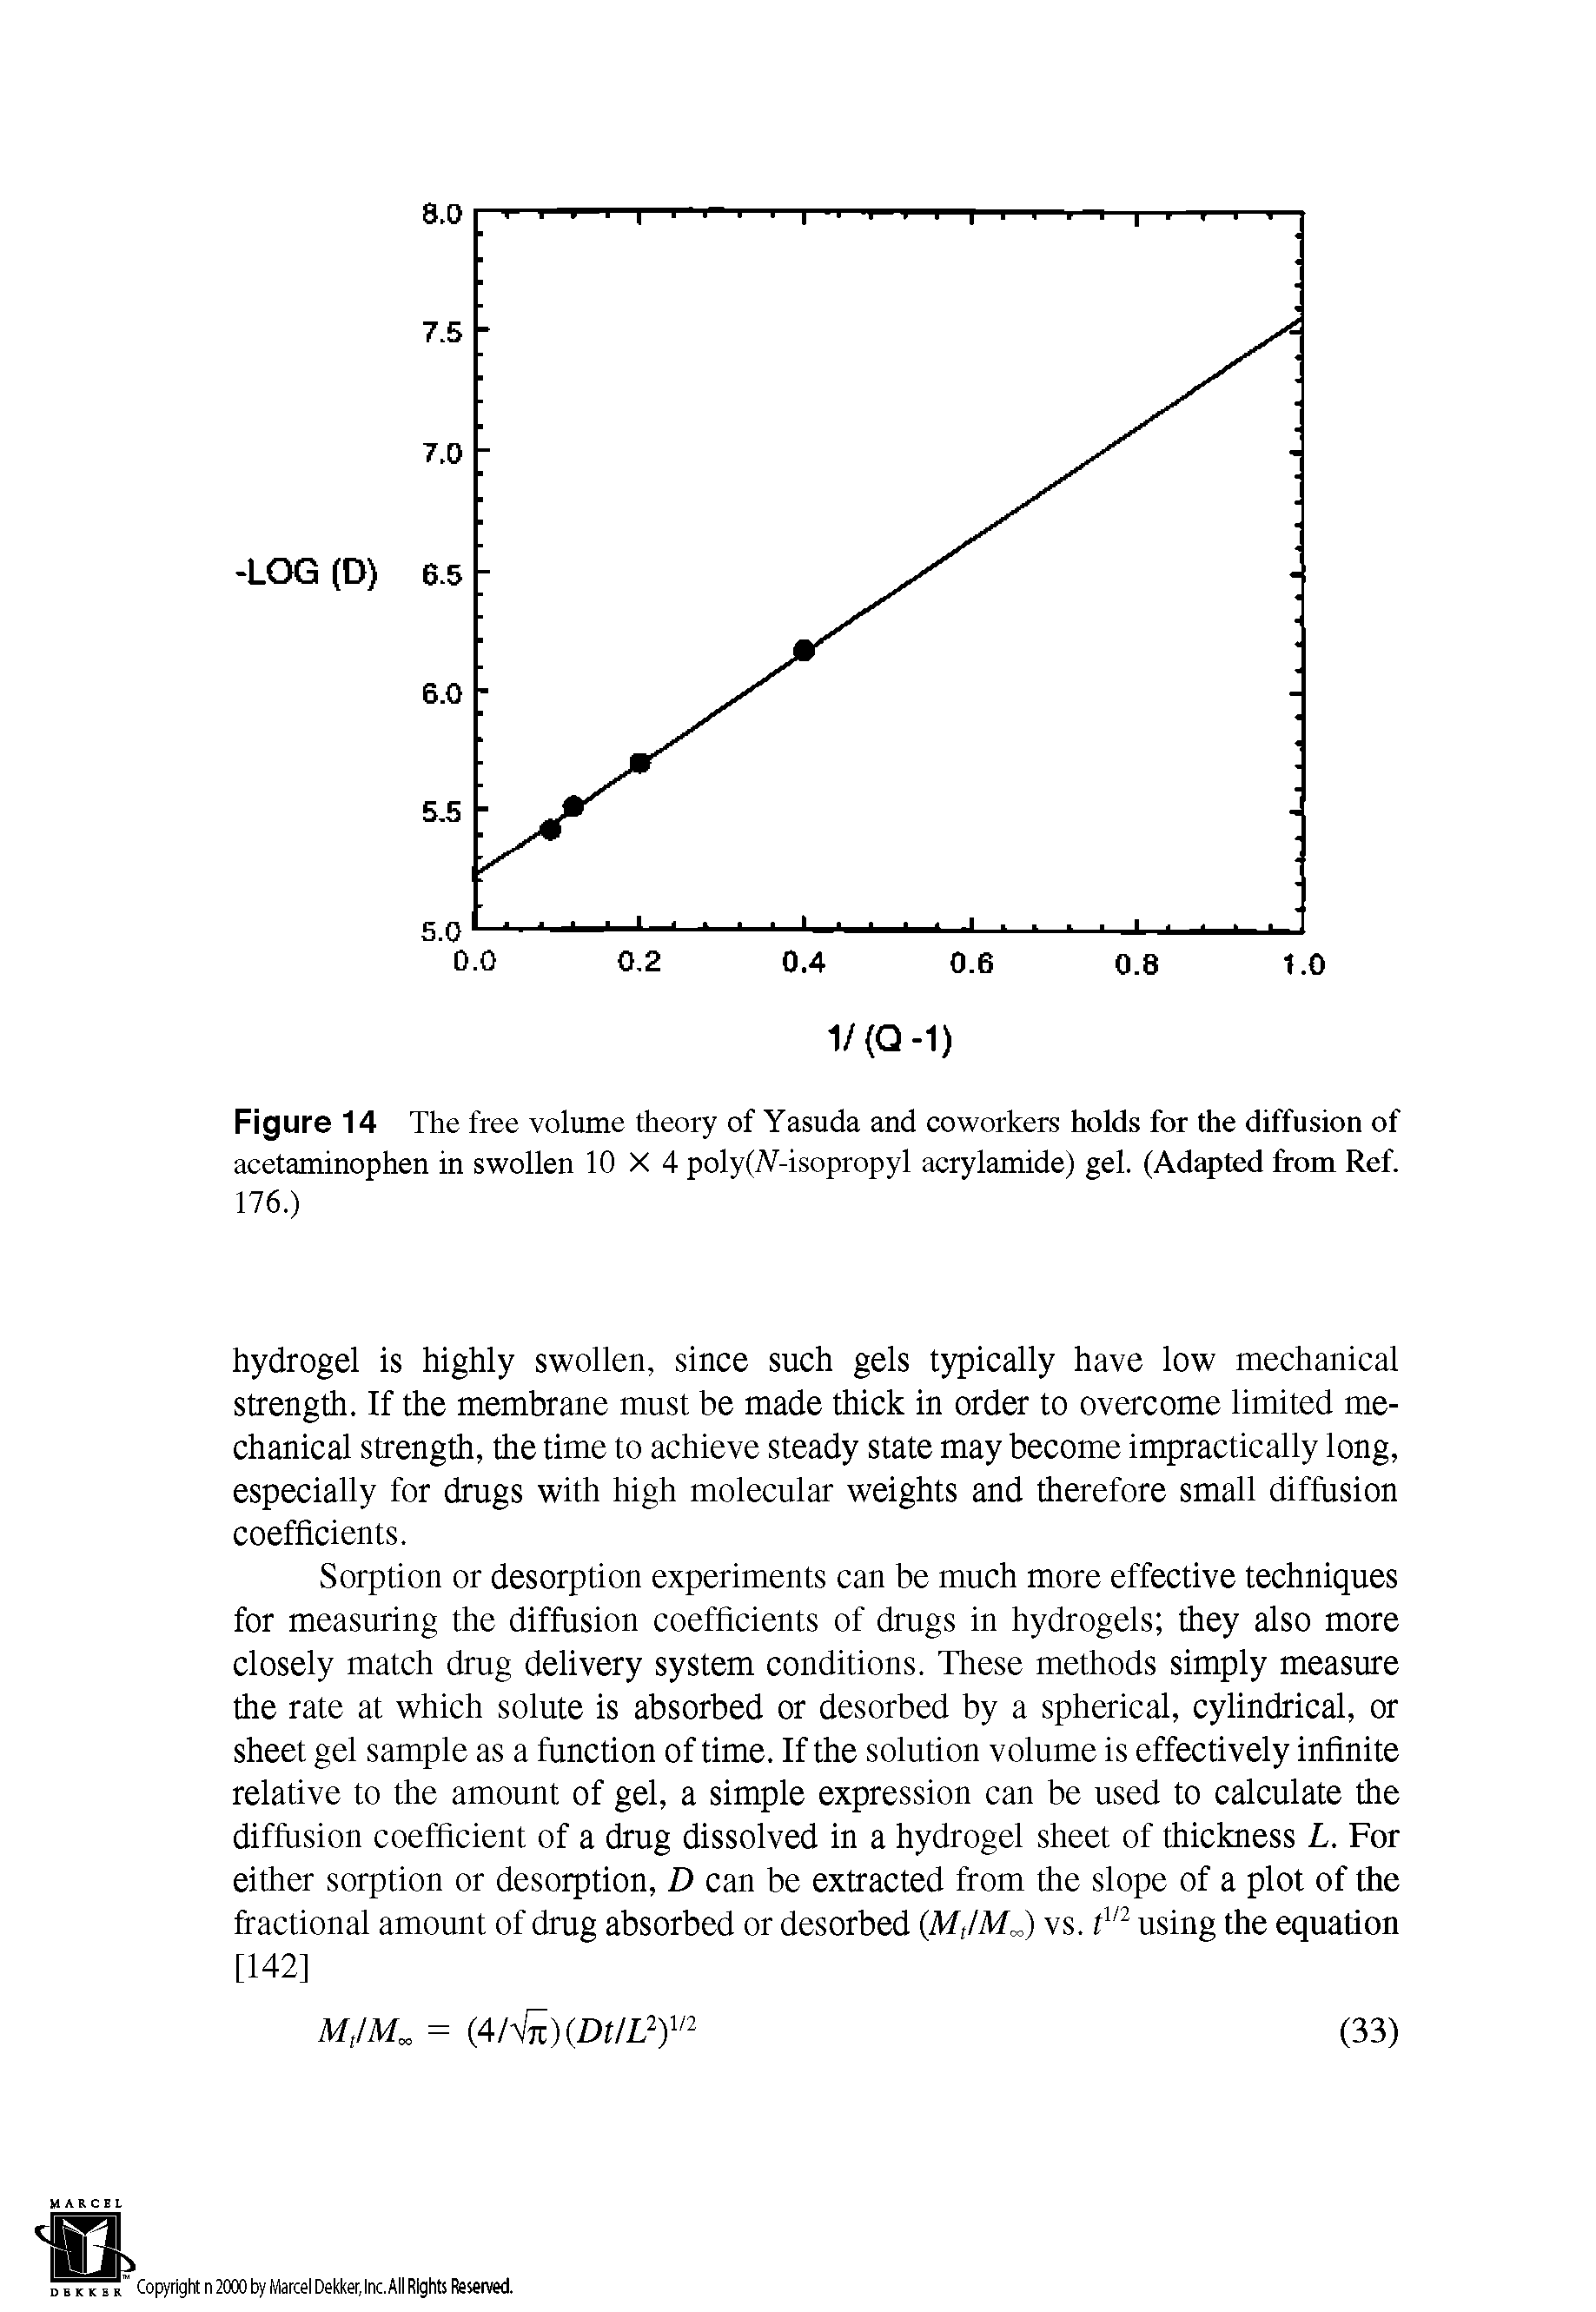 Figure 14 The free volume theory of Yasuda and coworkers holds for the diffusion of acetaminophen in swollen 10 X 4 poly(lV-isopropyl acrylamide) gel. (Adapted from Ref. 176.)...